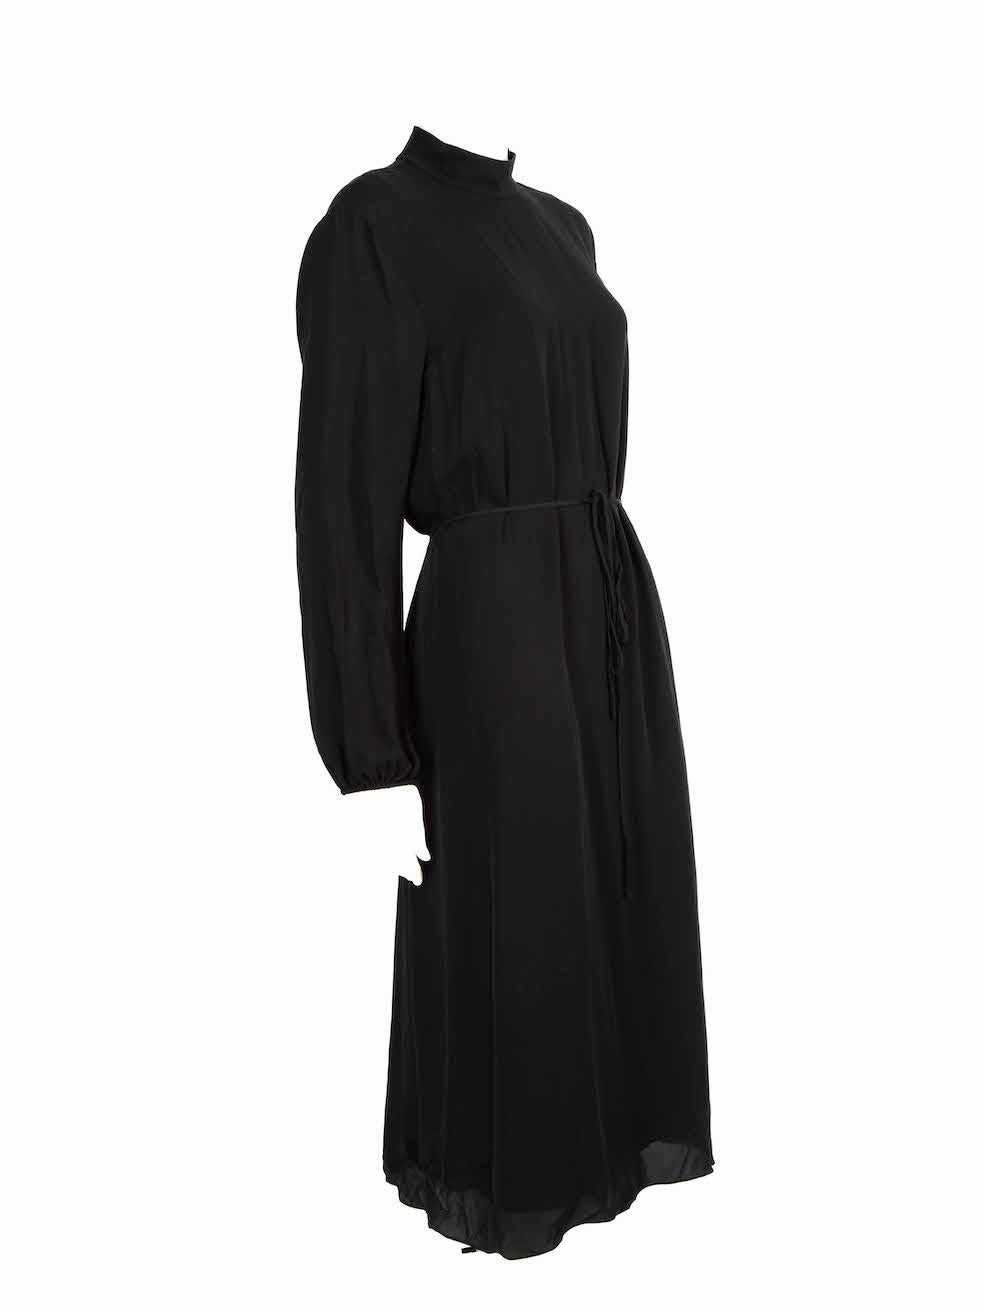 CONDITION is Very good. Minimal wear to dress is evident. Minimal wear to the neckline button fastening at the rear with the top button missing on this used Theory designer resale item.
 
 
 
 Details
 
 
 Black
 
 Silk
 
 Long sleeves dress
 
 Midi